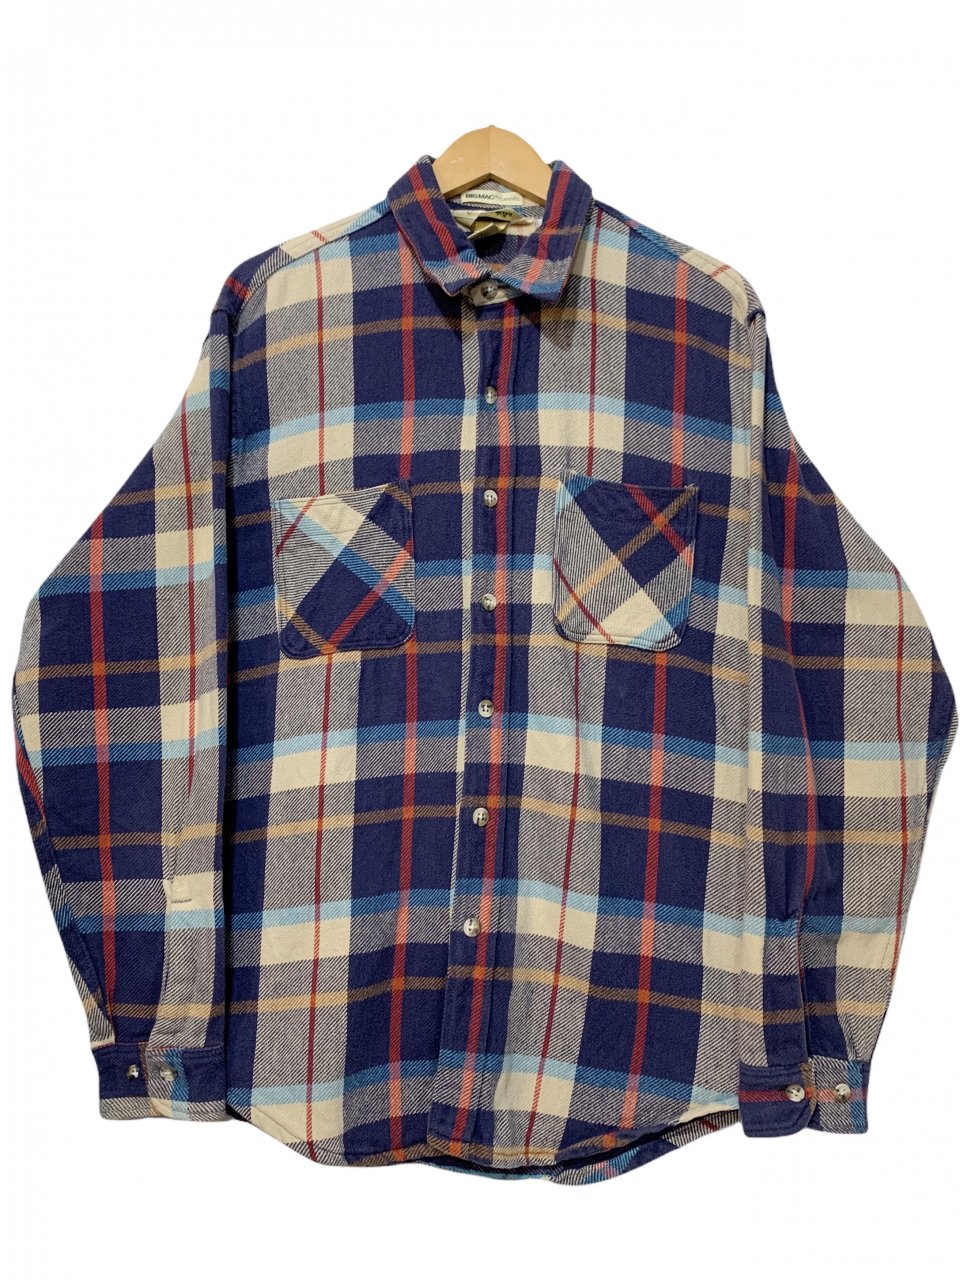 USA製 90s ST JOHN'S BAY Check Flannel L/S Shirt 紺 L セント 